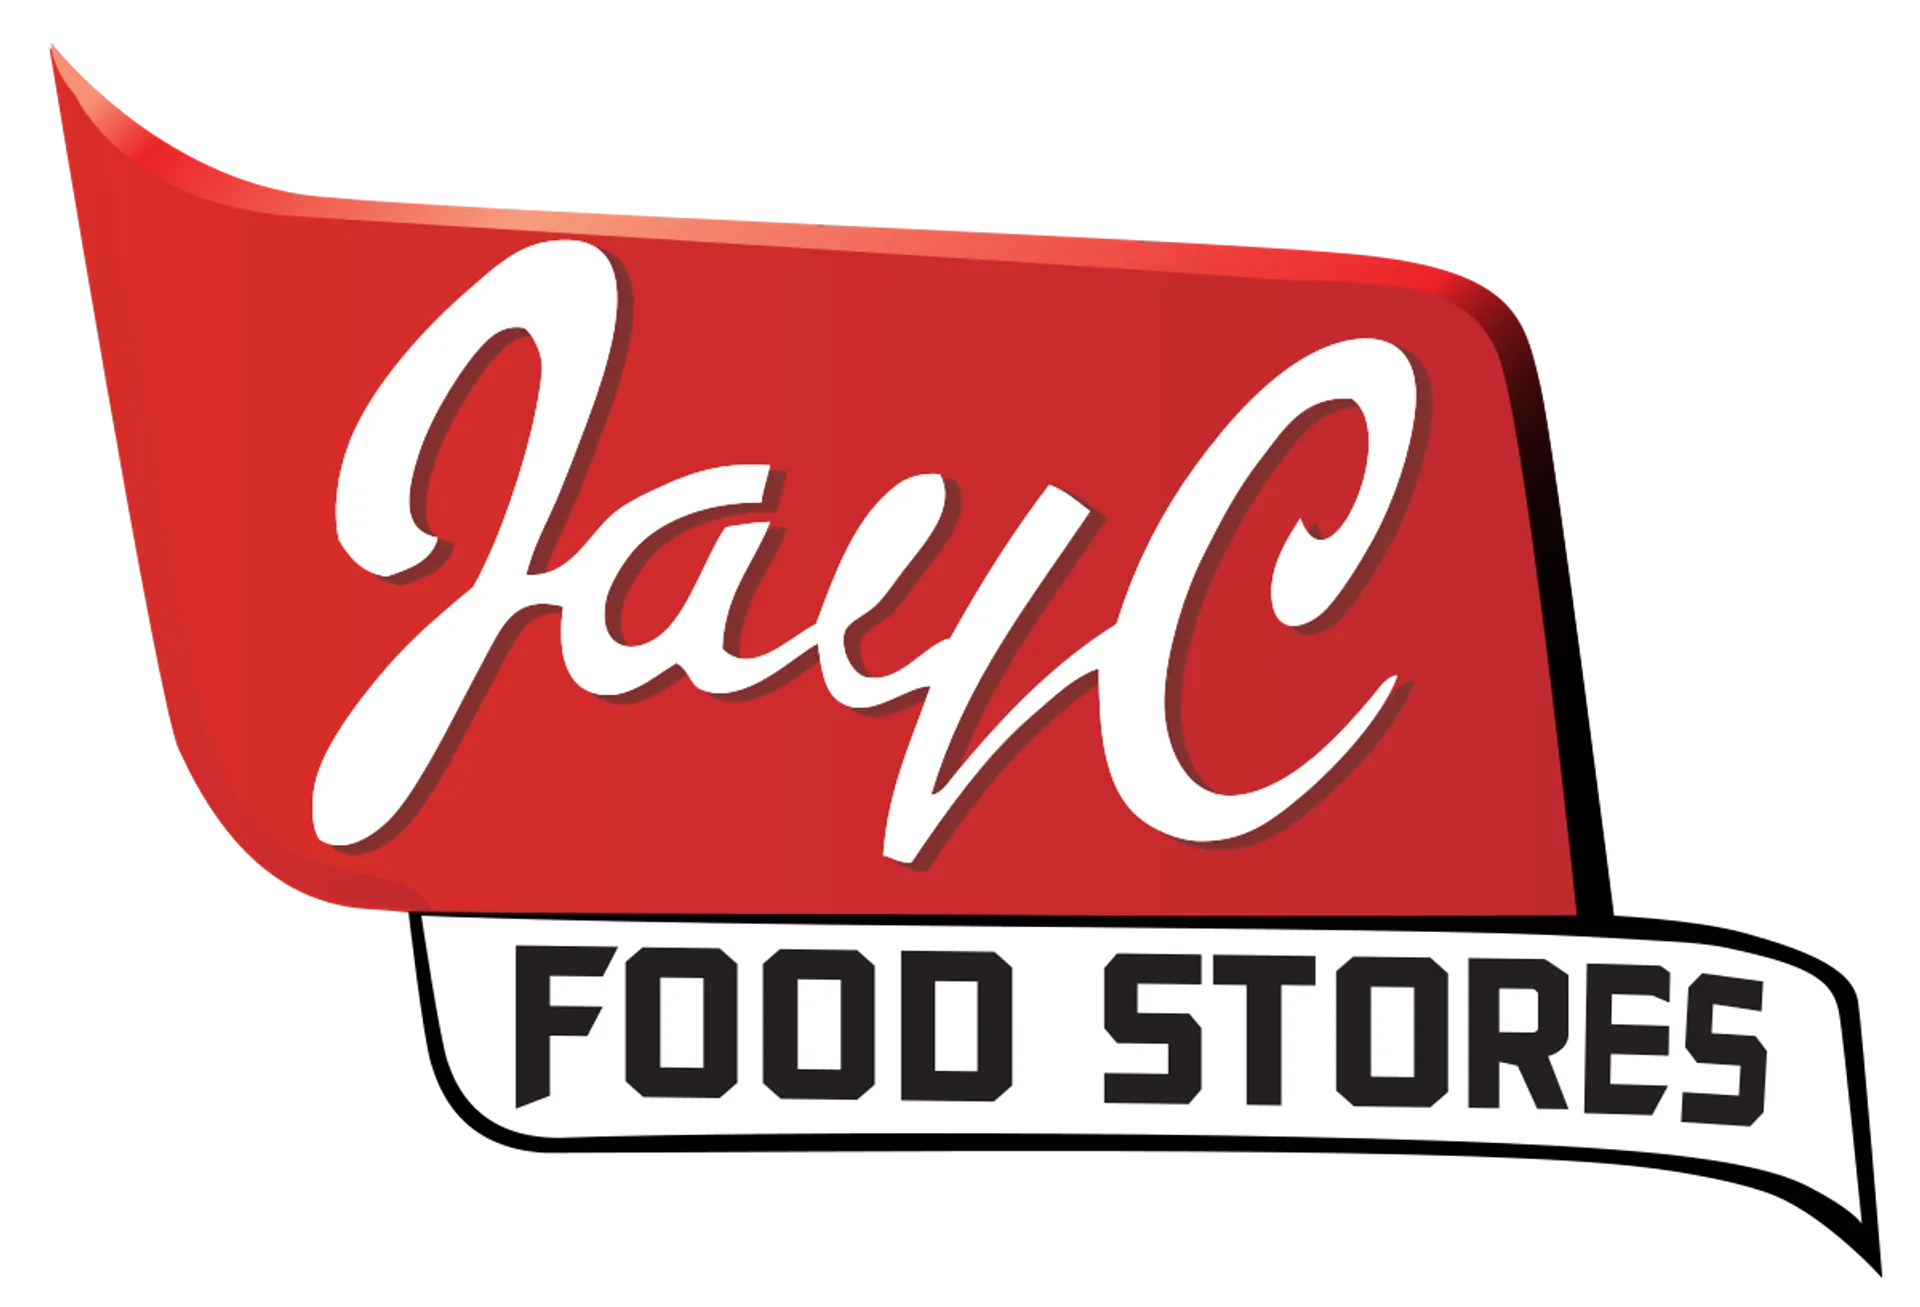 JAY C FOOD STORES logo. Current weekly ad